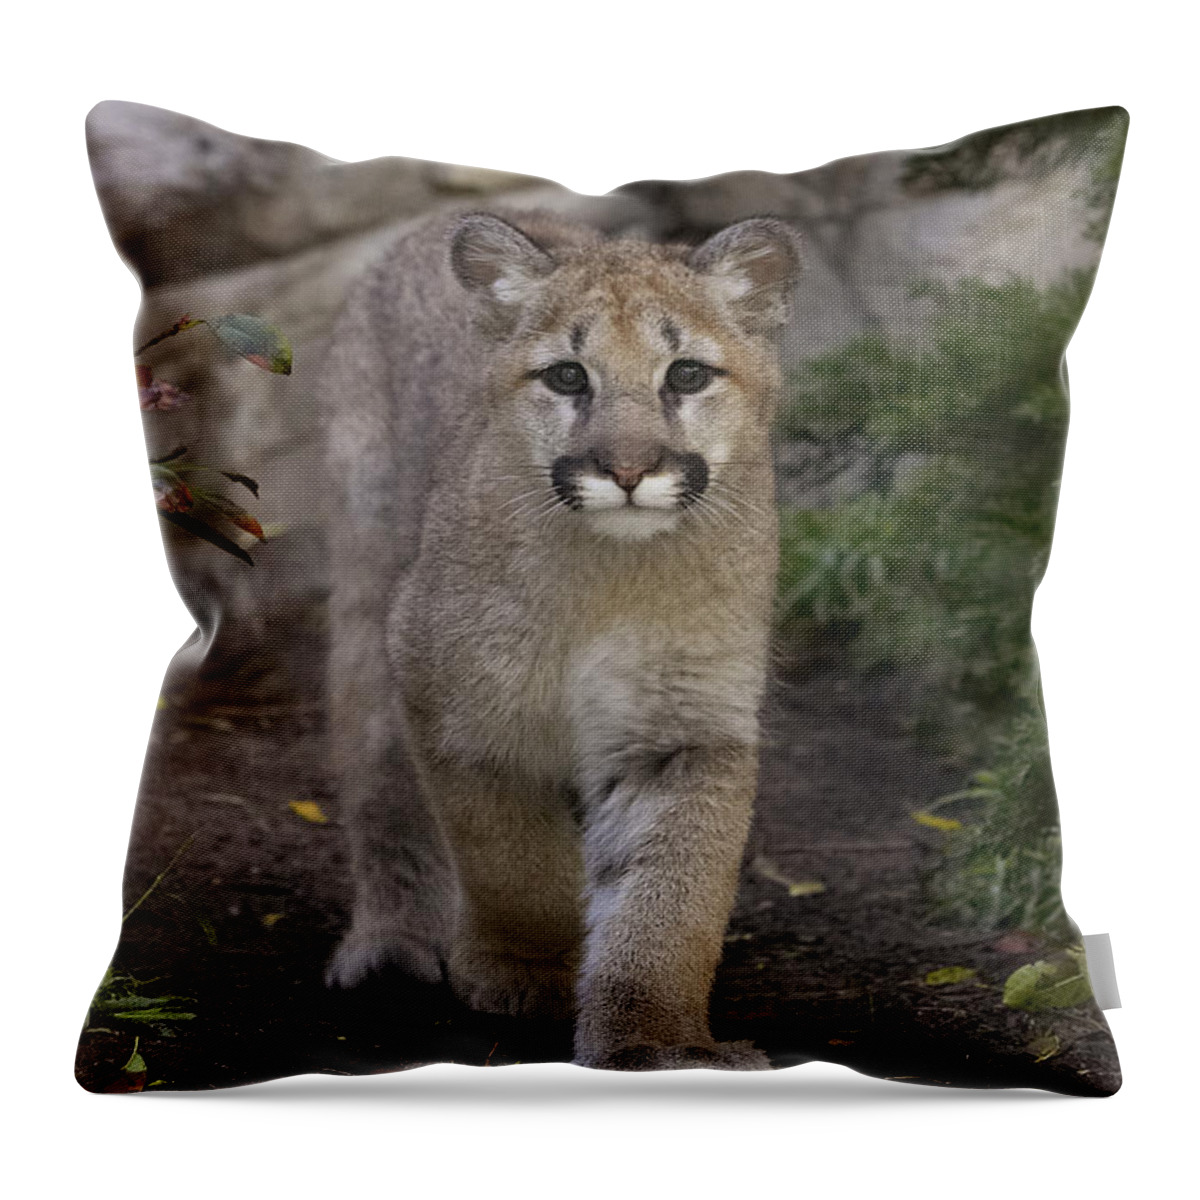 Feb0514 Throw Pillow featuring the photograph Mountain Lion Cub Walking by San Diego Zoo